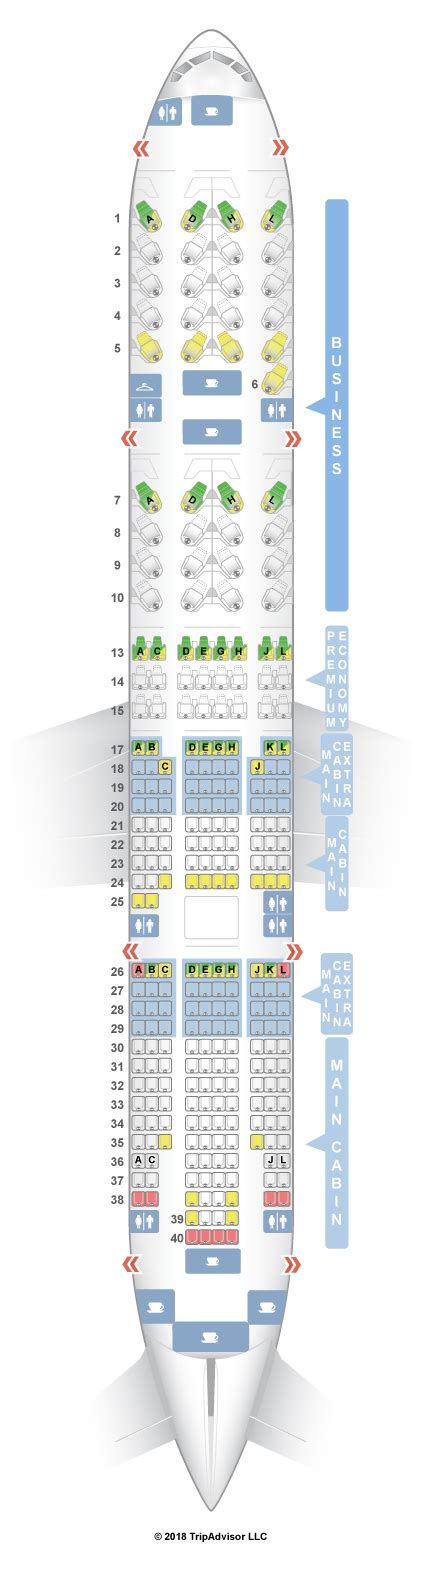 Sep 9, 2022 ... Seating on Boeing 777-200 ... I'm traveling to London in November and don't have experience on this type of plane. Can anyone recommend the best ( .... 